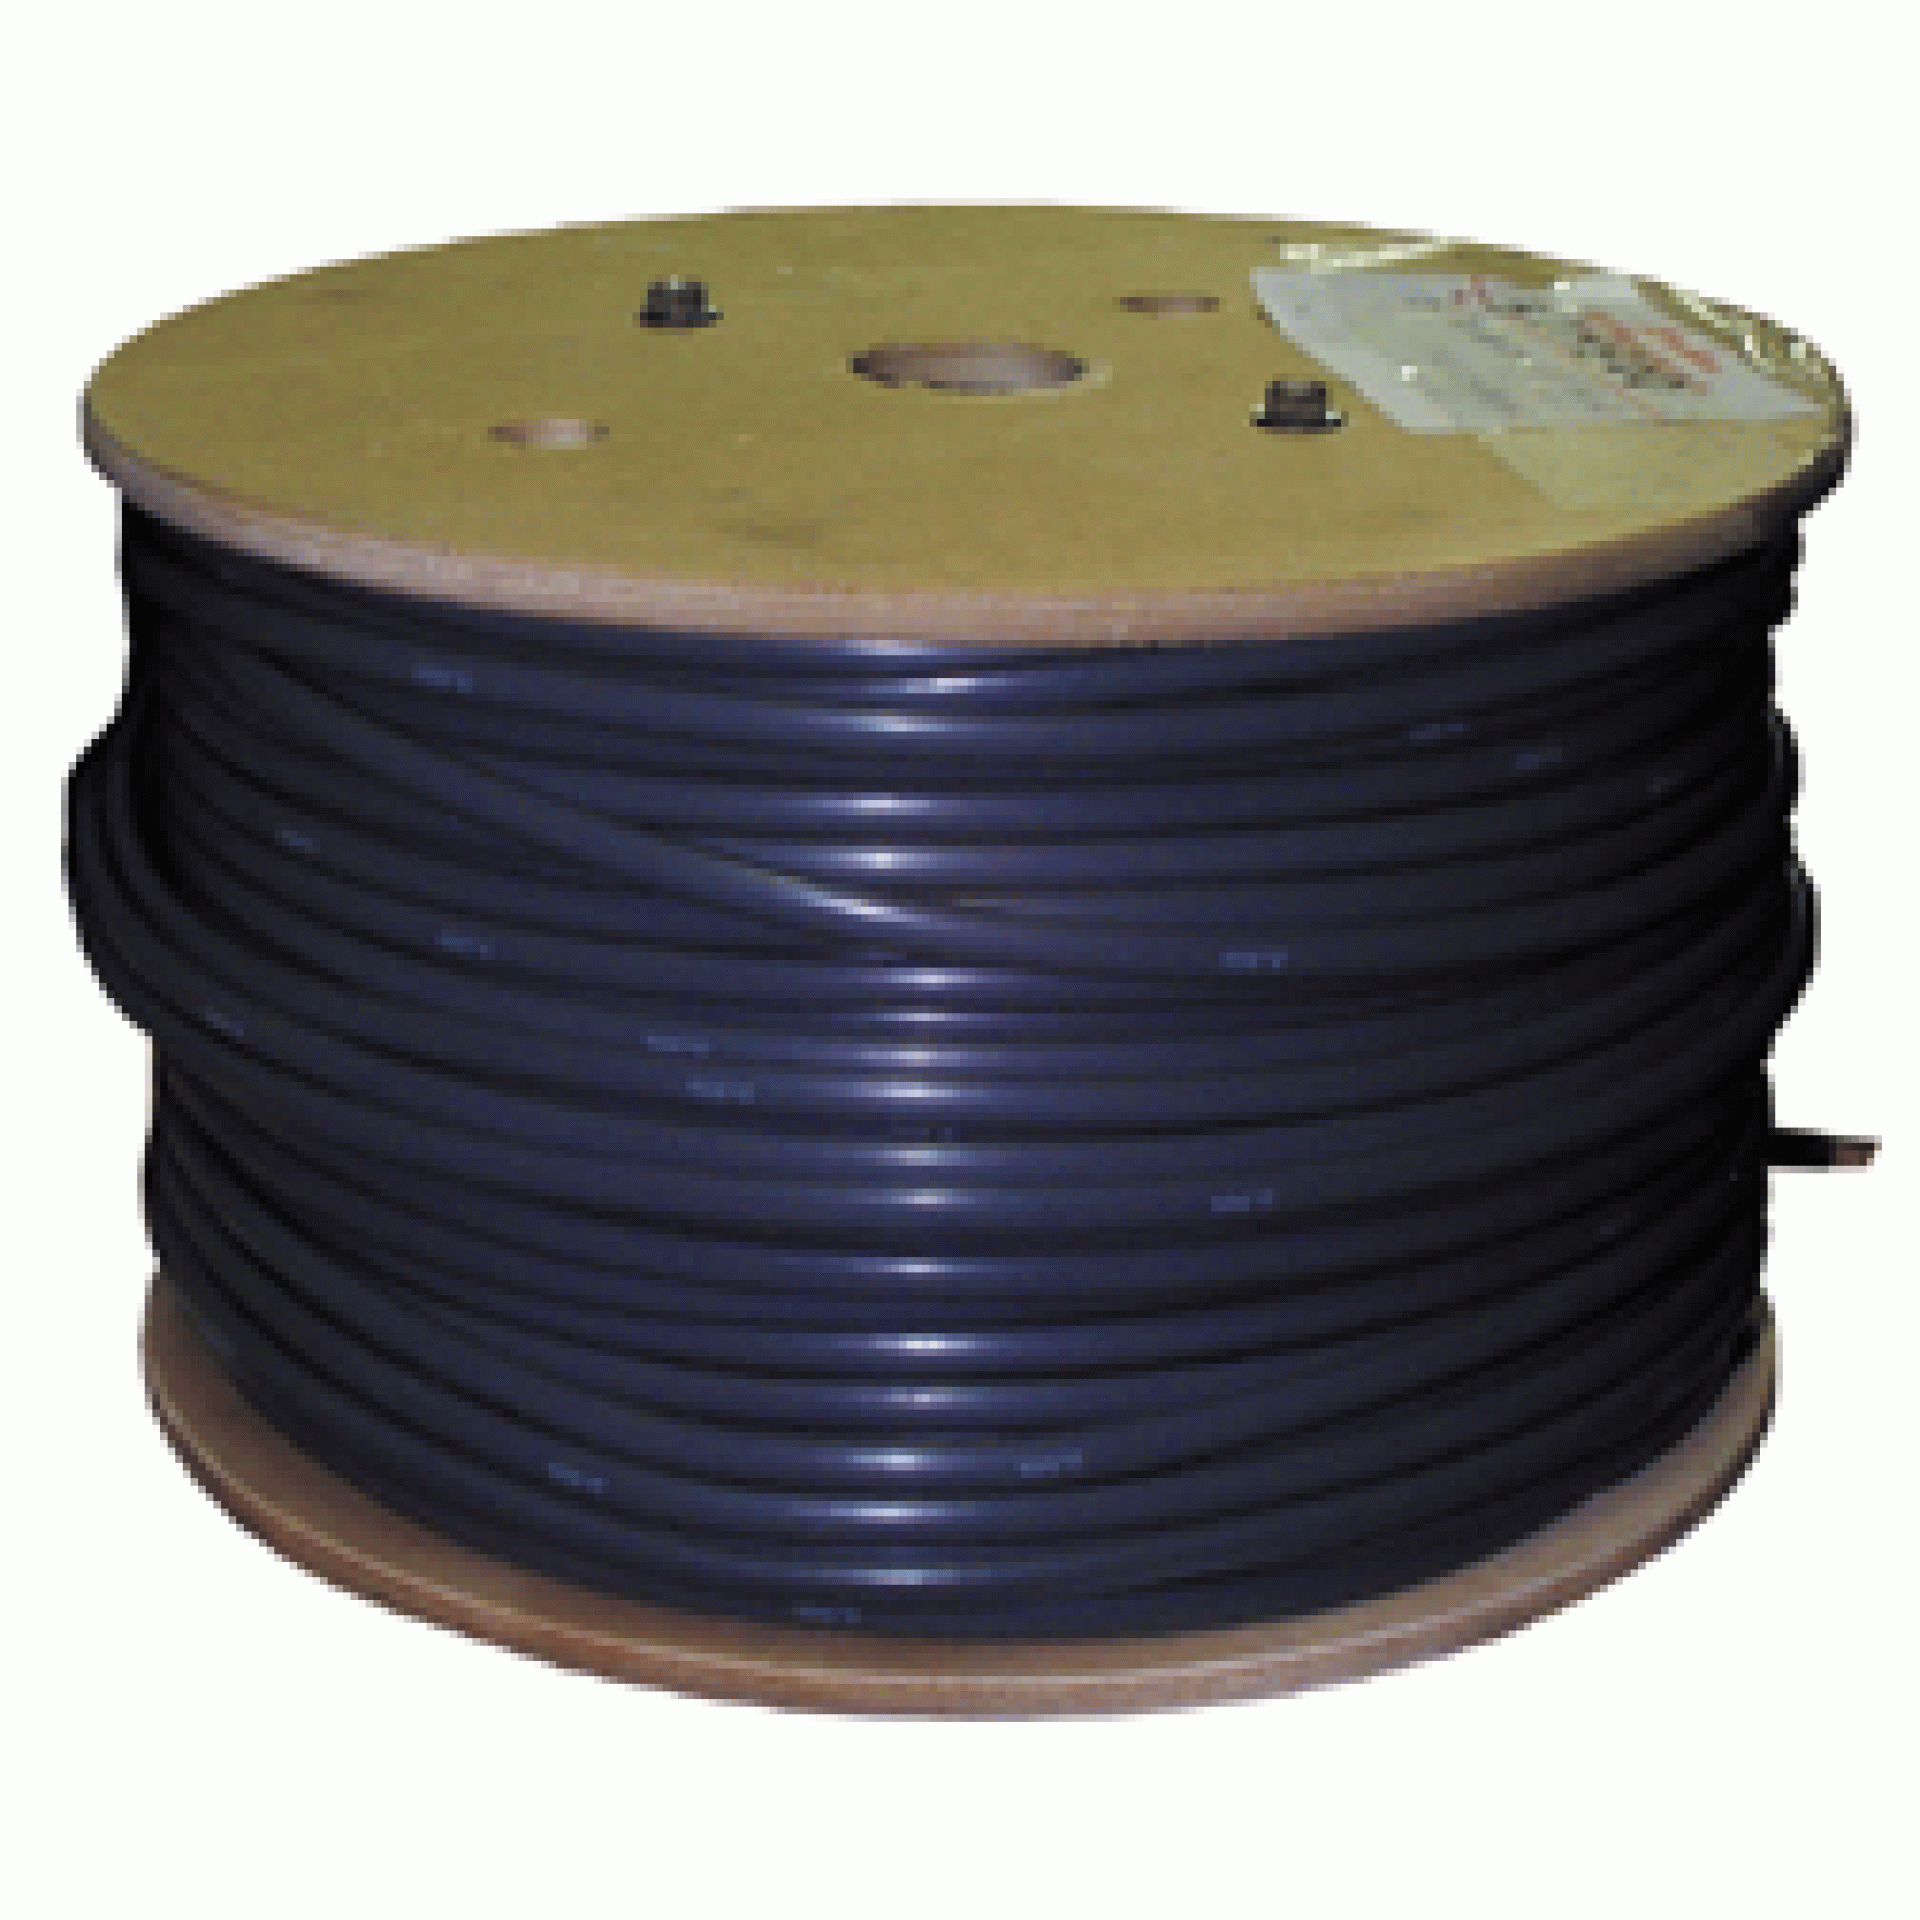 DEKA | 03207 | JACKETED BRAKE WIRE - STRANDED COPPER WIRE WITH BLACK AND WHITE WITH GRAY JACKET 500' - 14-2